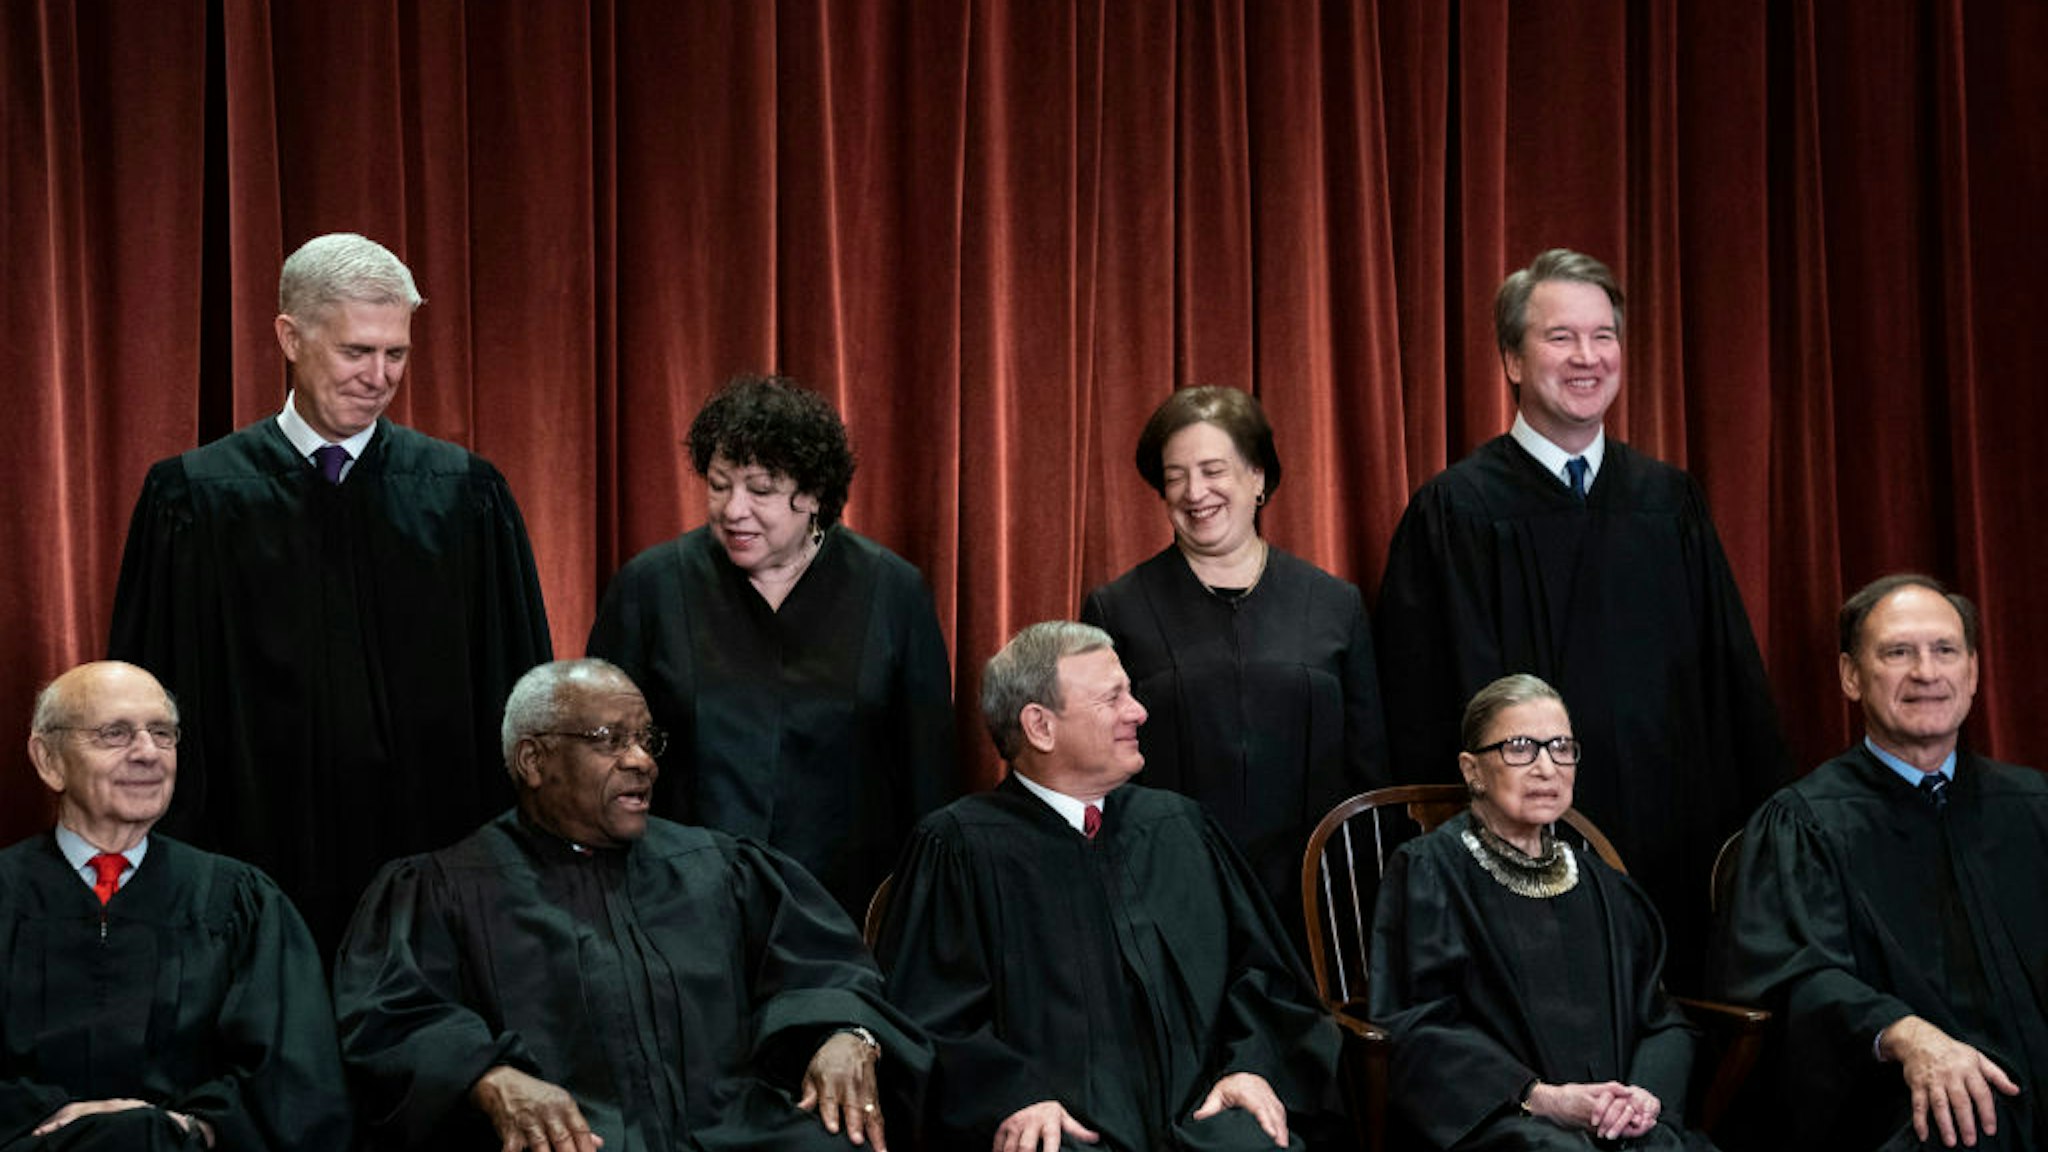 Justices of the United States Supreme Court sit for their official group photo at the Supreme Court on Friday, Nov. 30, 2018 in Washington, DC.